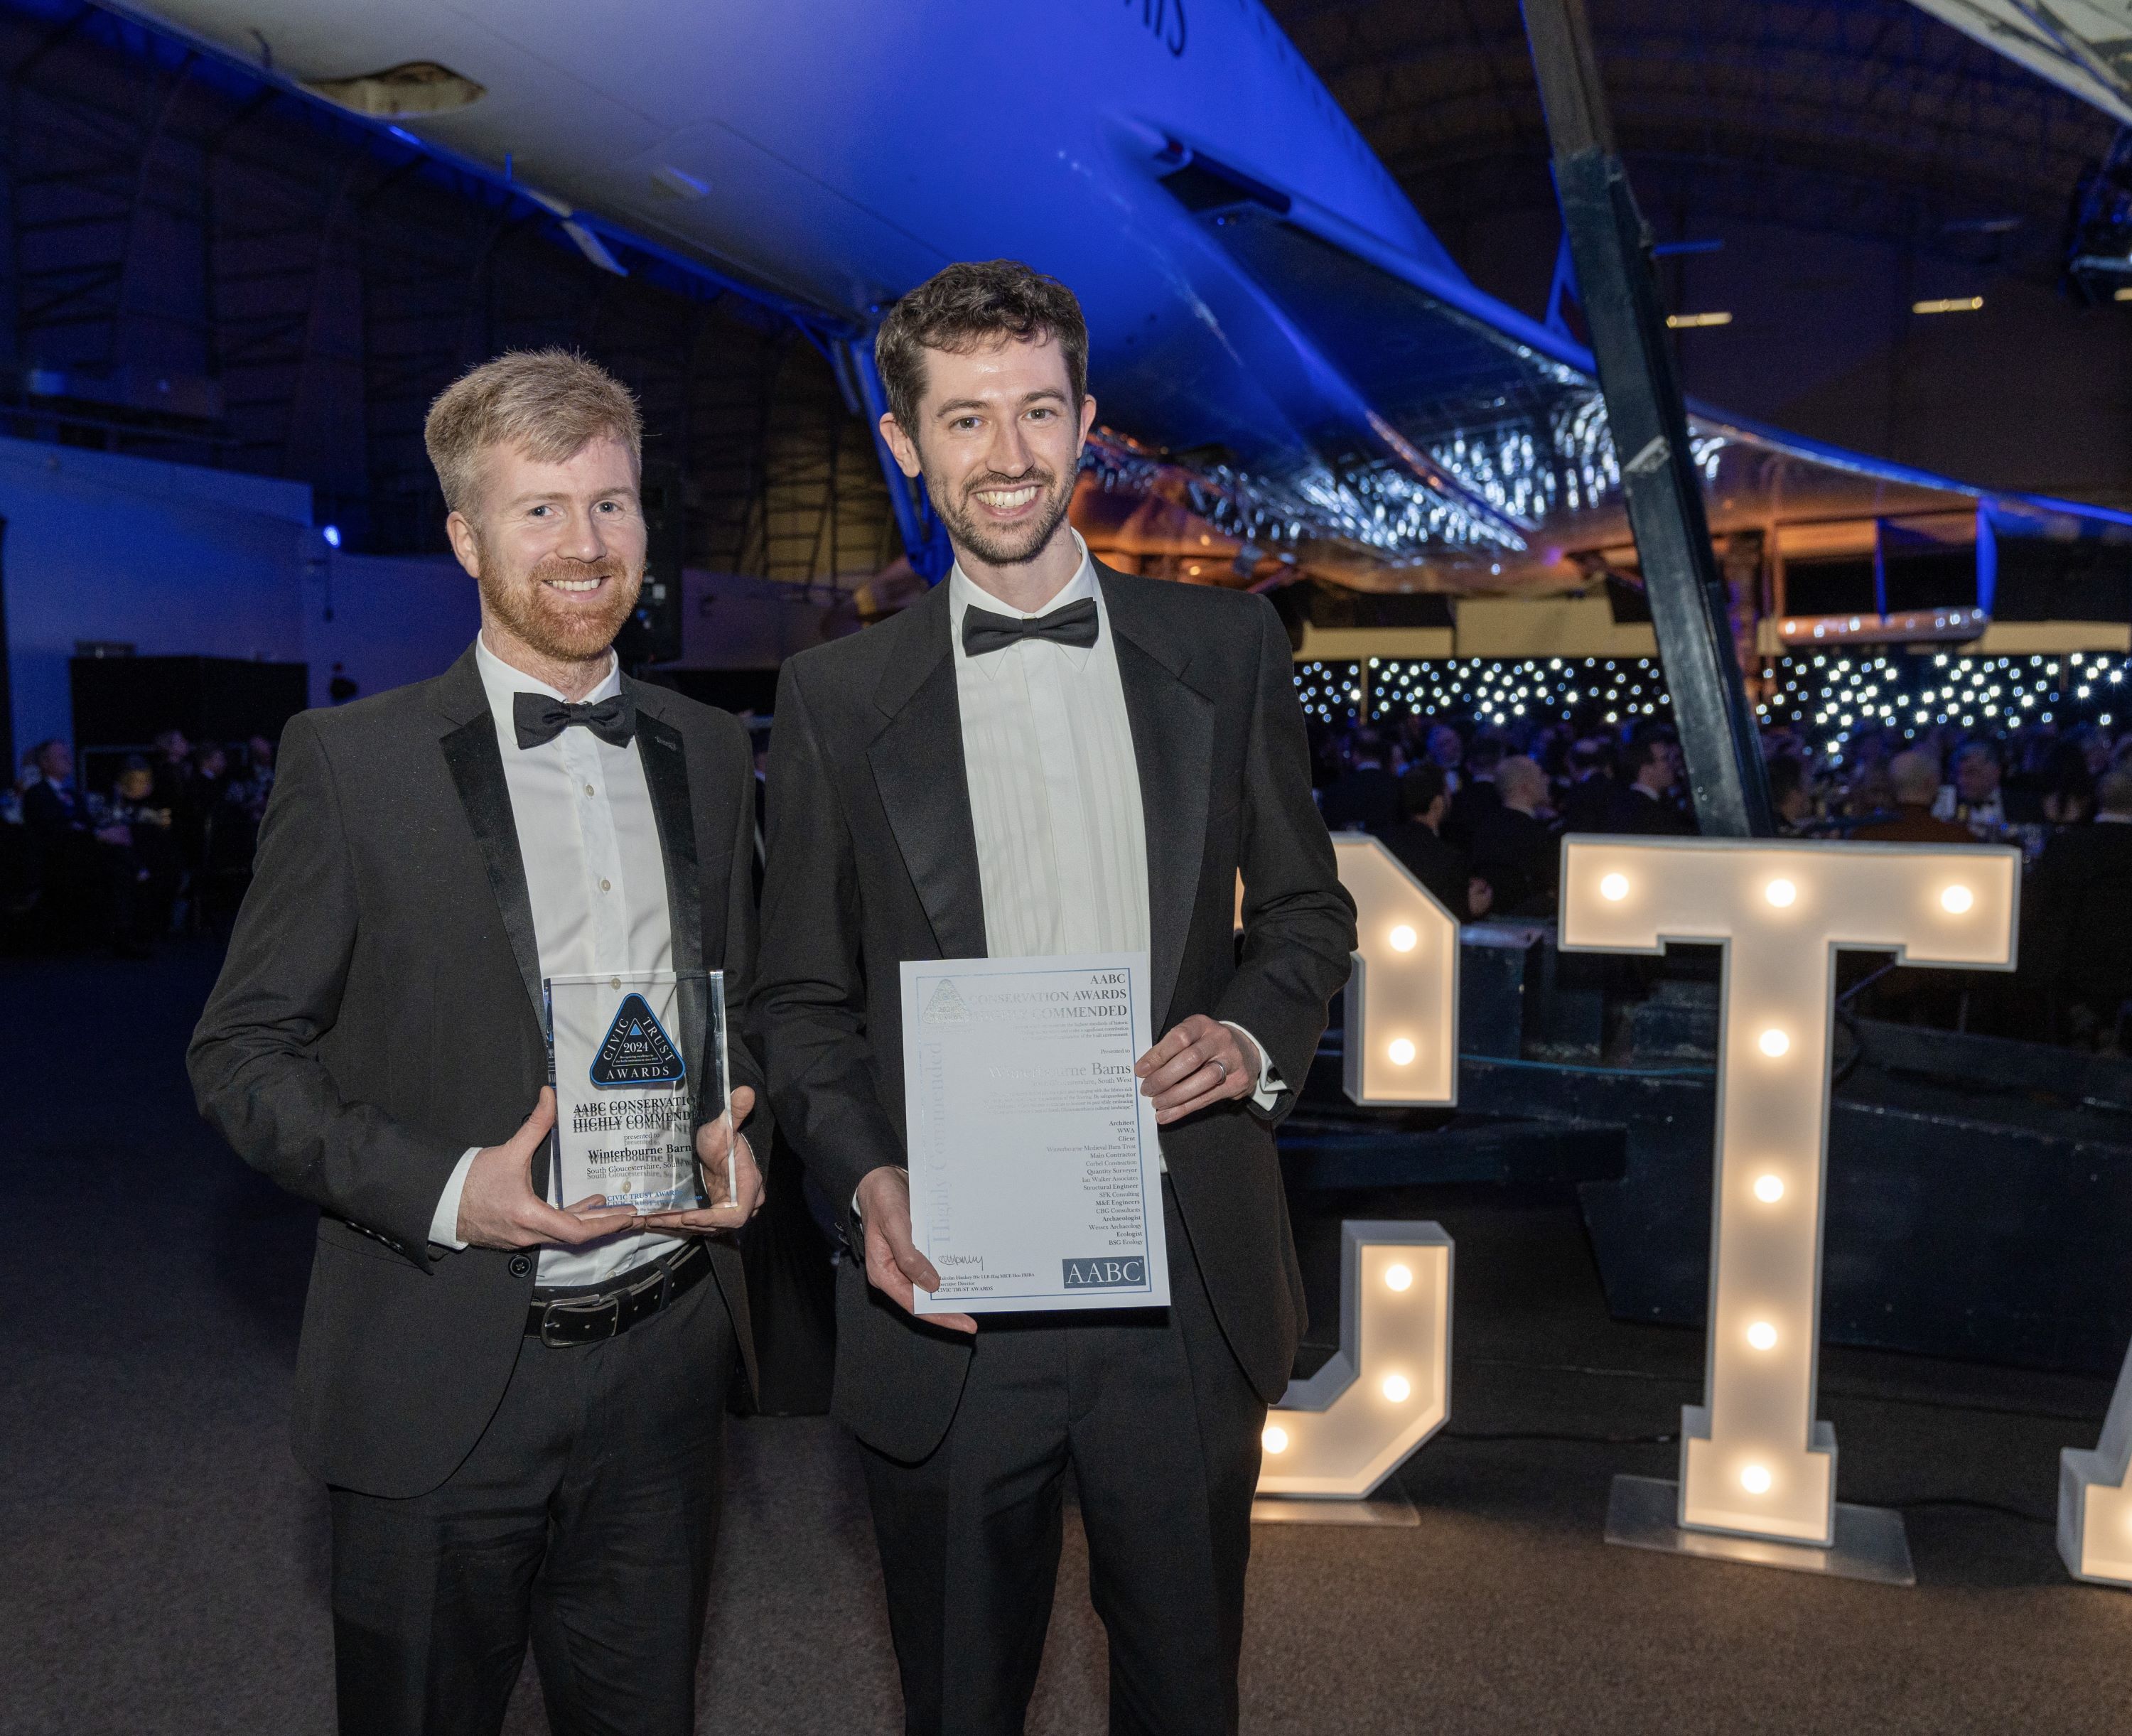 Mark Slater and Matt Hinkins at the Civic Trust Award prize giving standing under the Concorde